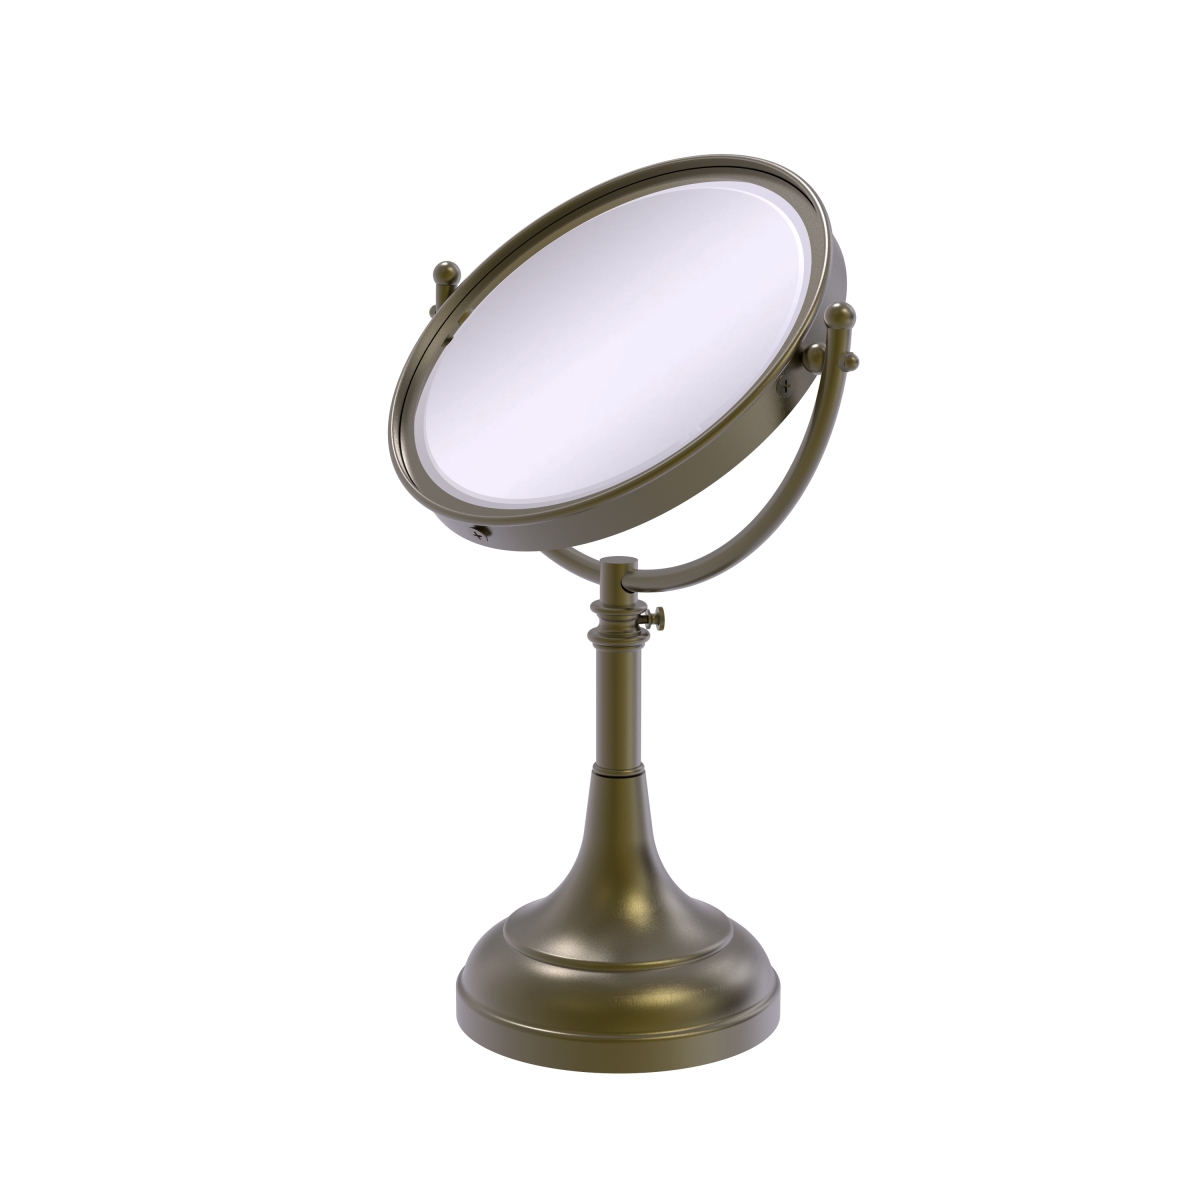 Picture of Allied Brass DM-1-5X-ABR 8 in. Height Adjustable Vanity Top Make-Up Mirror 5X Magnification, Antique Brass